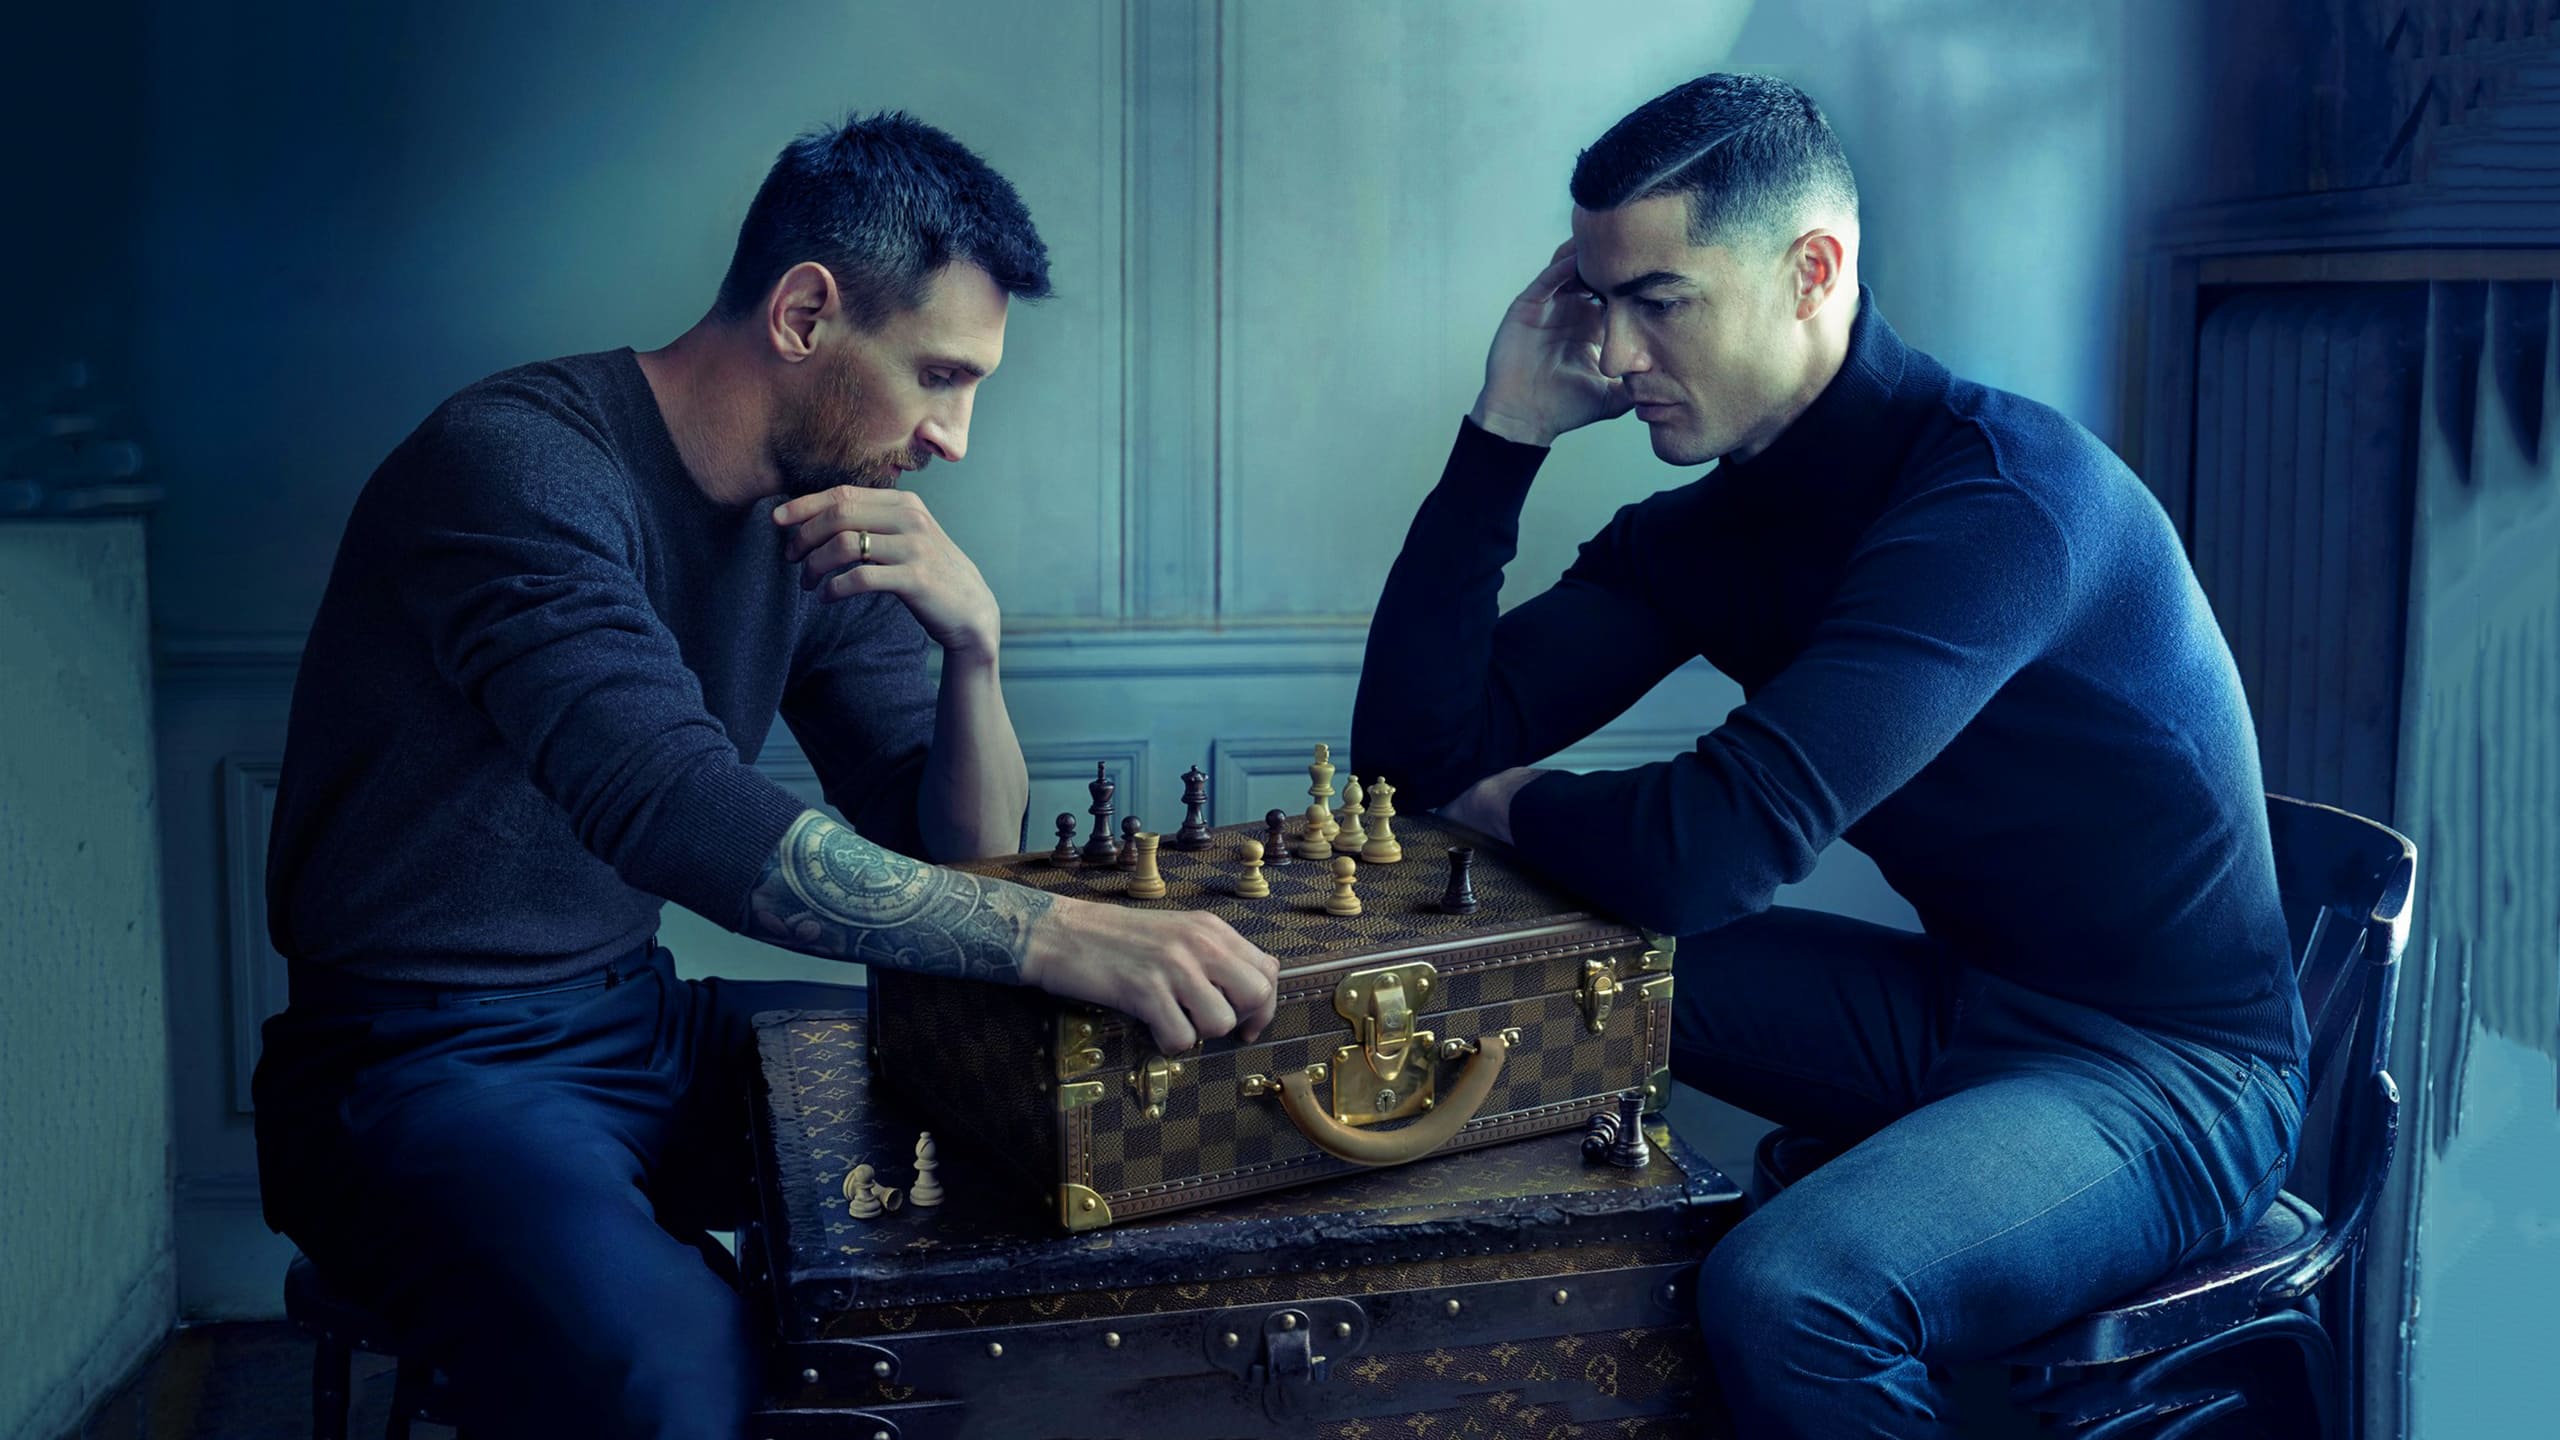 Messi and ronaldo playing chess 4k wall paper｜TikTok Search